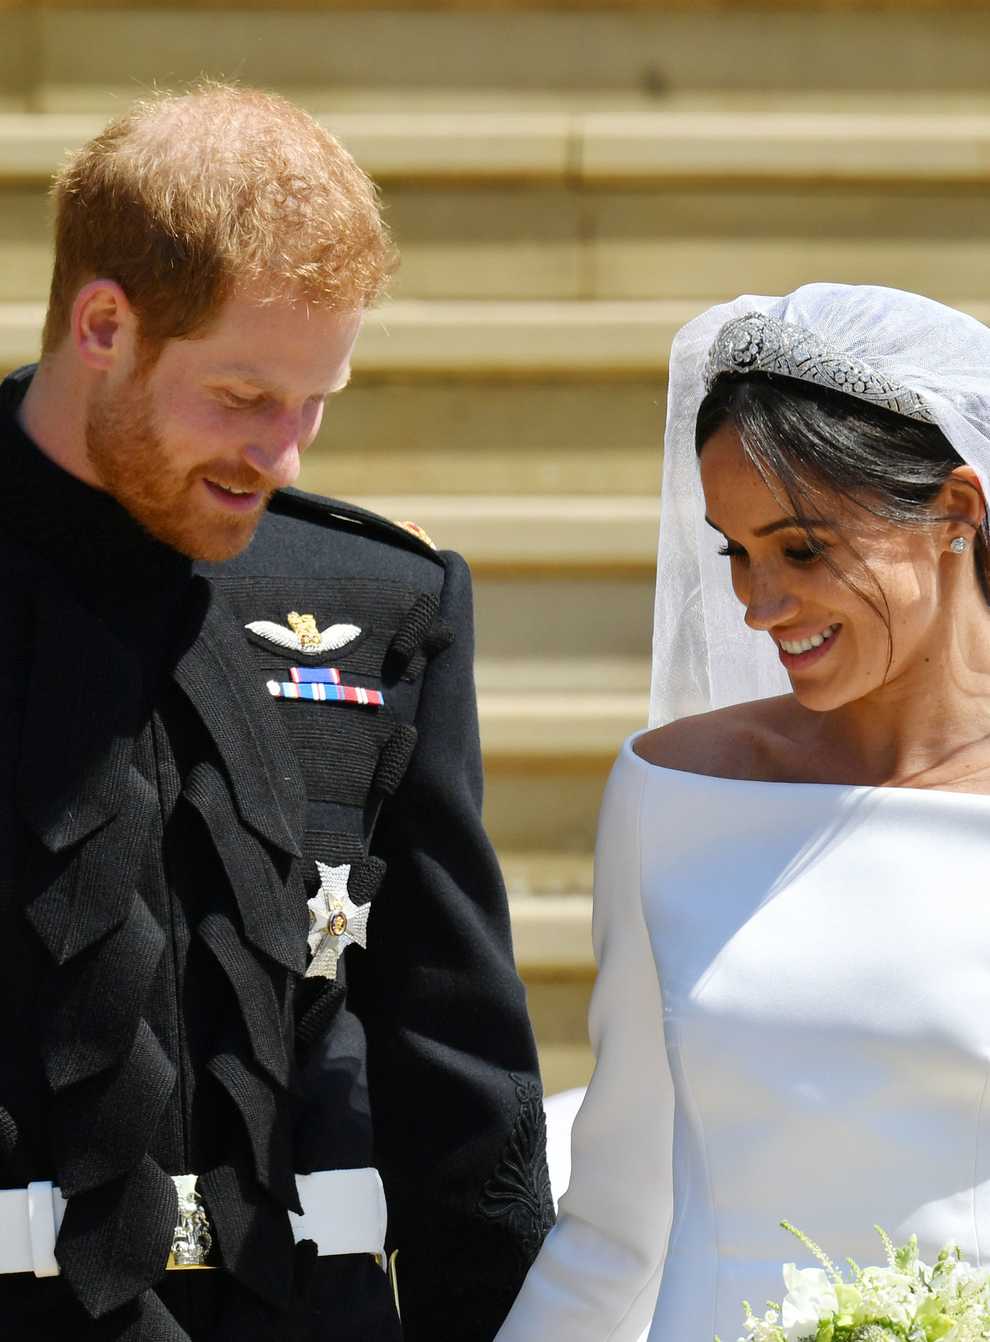 Harry and Meghan on their wedding day (Ben Birchall/PA)